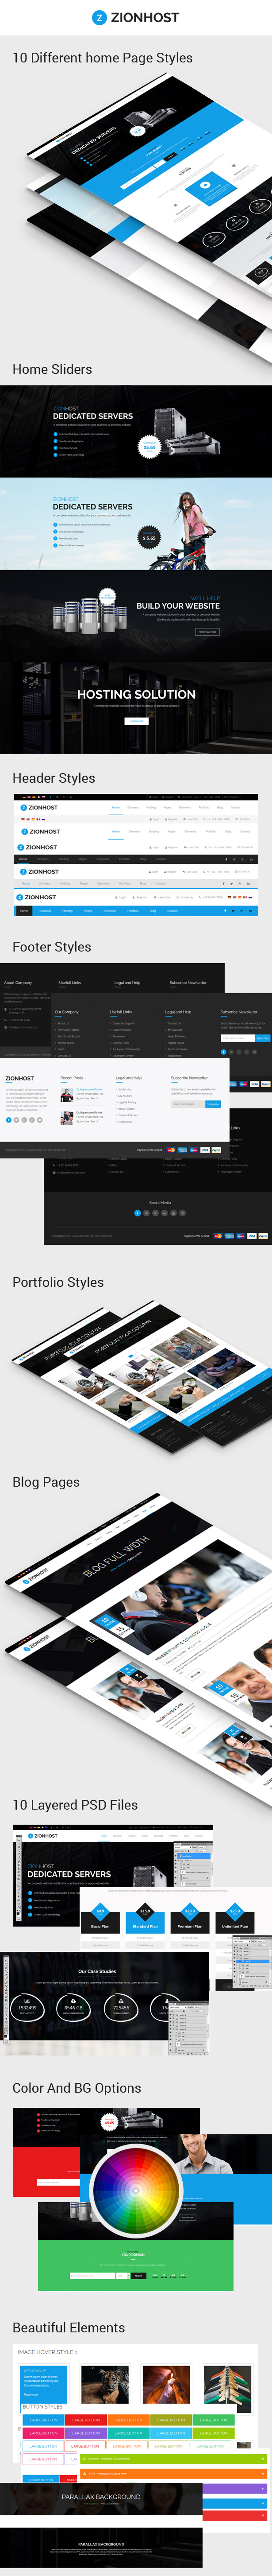 features - ZionHost - Web Hosting, Responsive HTML5 Template